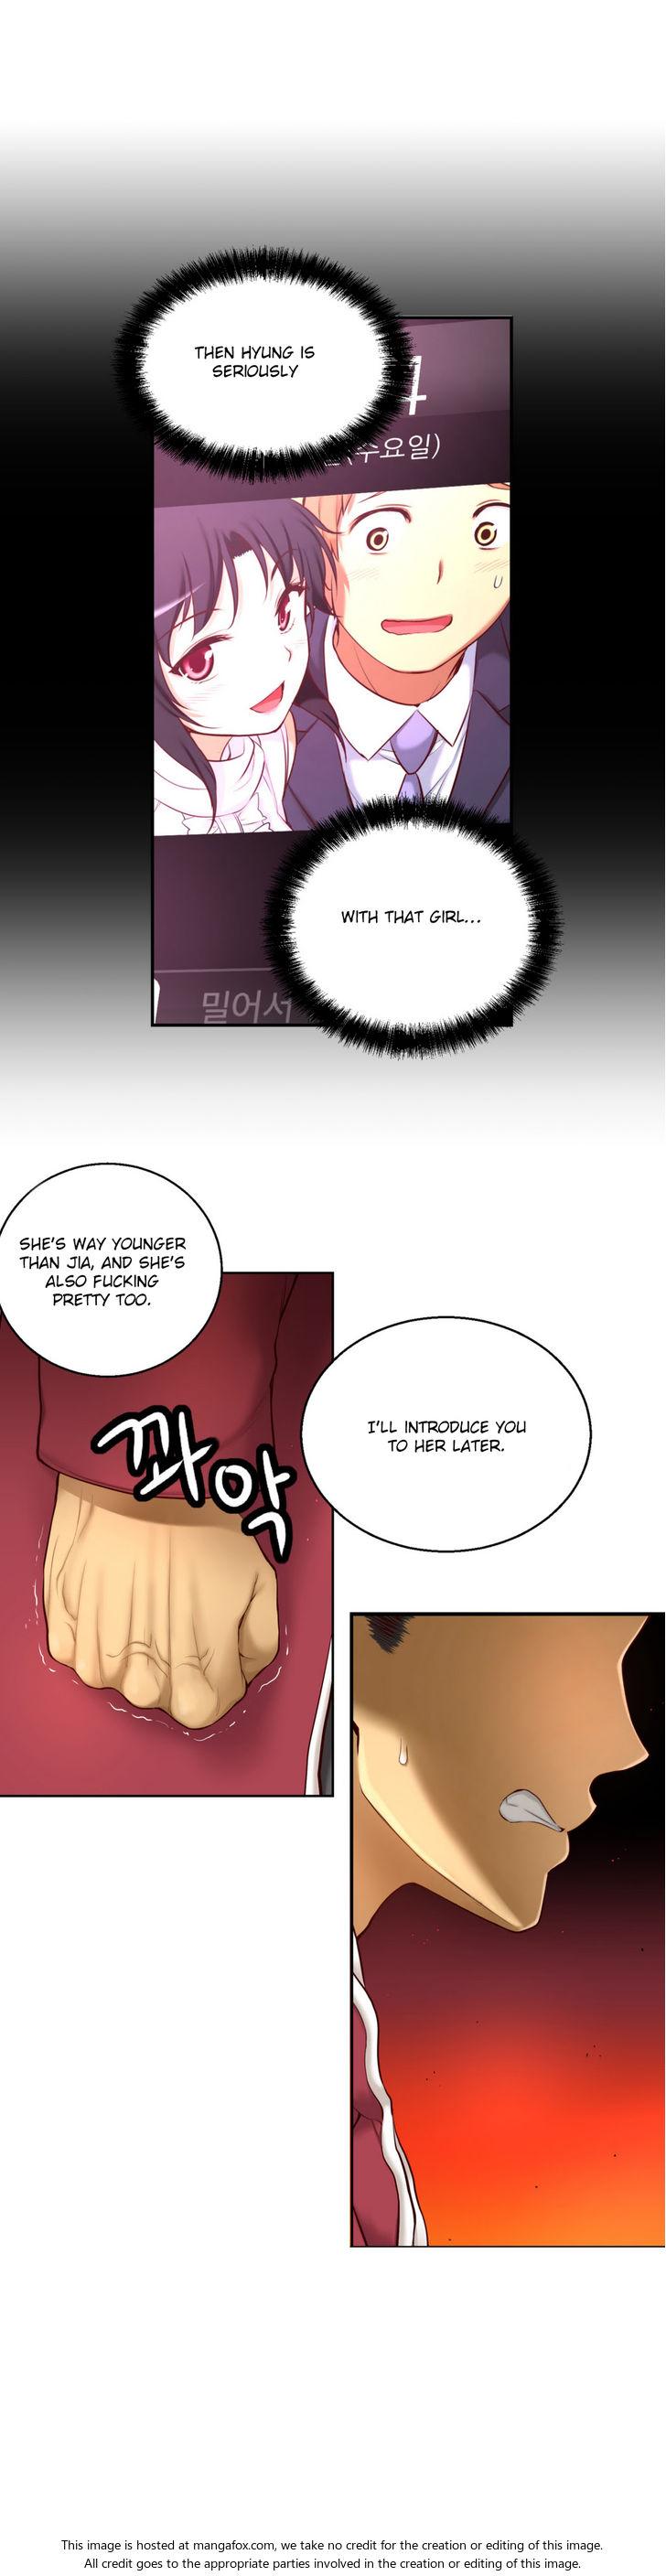 [Donggul Gom] She is Young (English) Part 1/2 1036